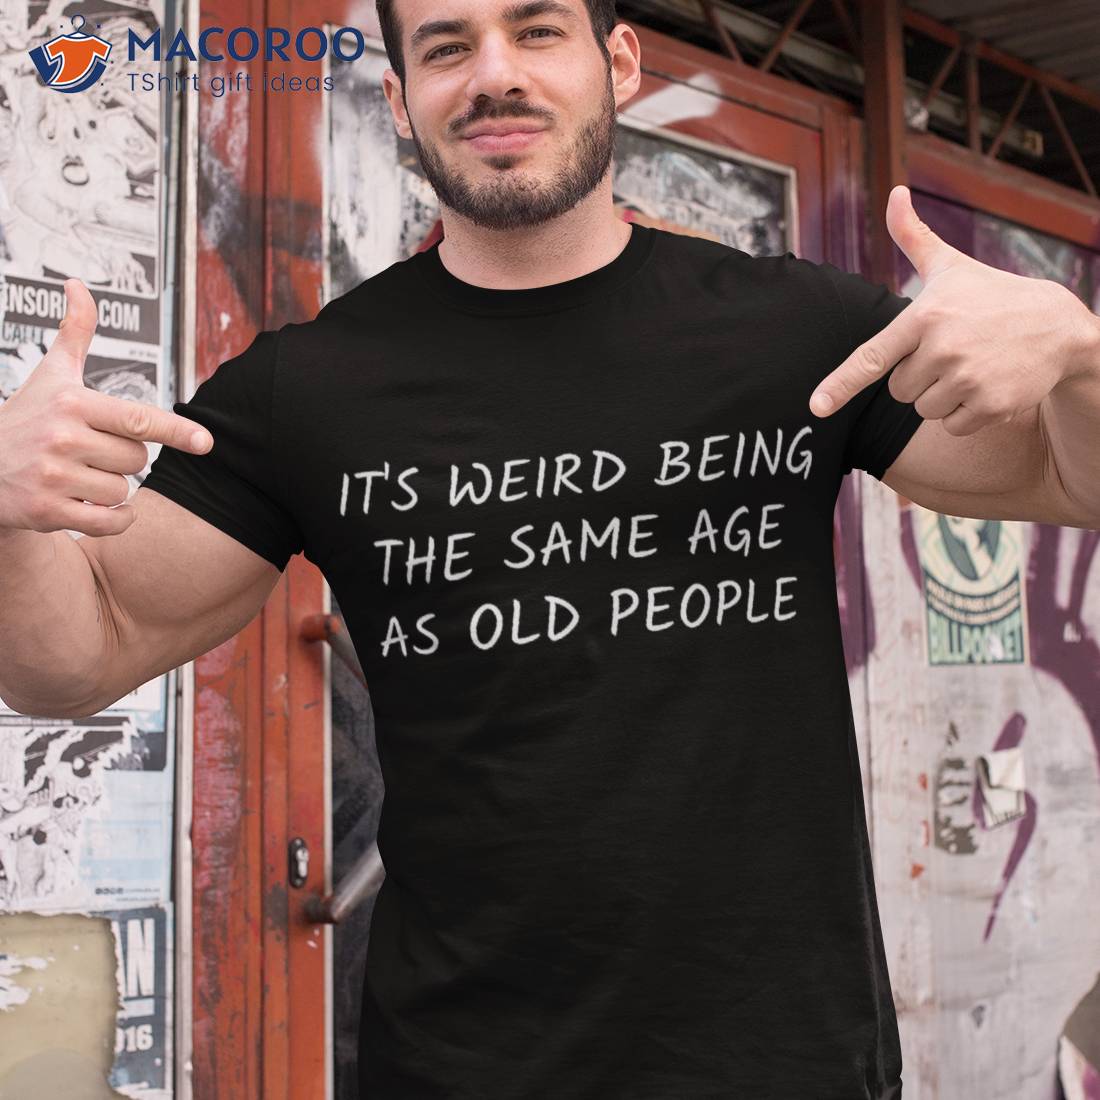 https://images.macoroo.com/wp-content/uploads/2023/06/it-s-weird-being-the-same-age-as-old-saying-funny-sarcastic-shirt-tshirt-1.jpg